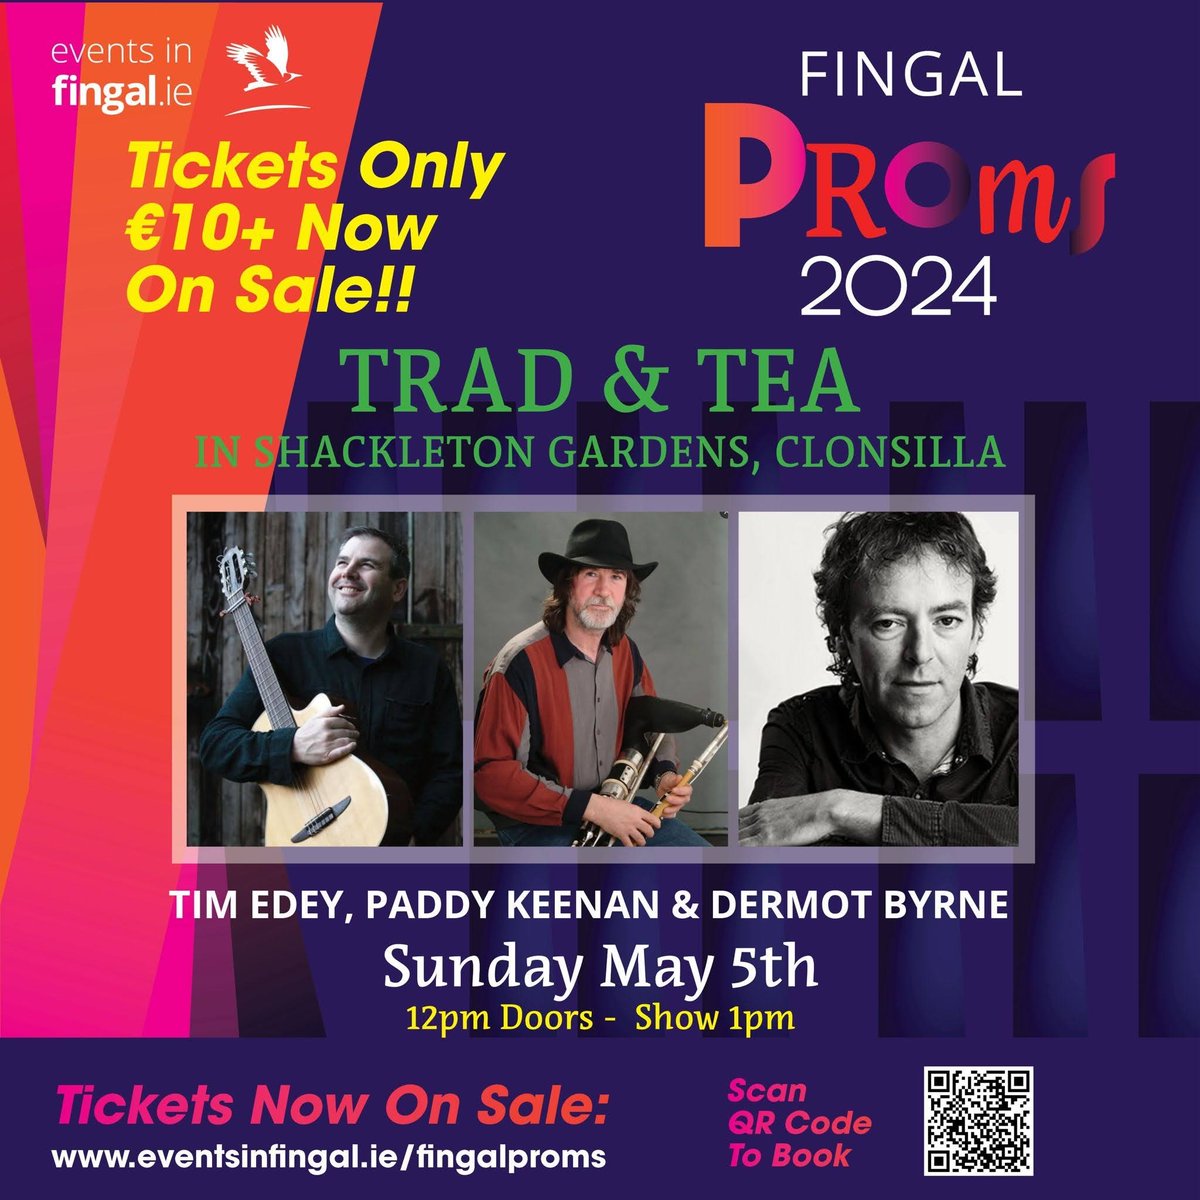 Trad & Tea 
Enjoy this brand new trio of Irish music legends this weekend!
Complimentary tea, coffee & pastry with your ticket
📍Shackleton Gardens Clonsilla 
🗓️ Sunday 5th May 
⏰Show starts 1pm 
Doors open 12pm 
Book your tickets on the link below 
eventsinfingal.ie/events/fingal-…